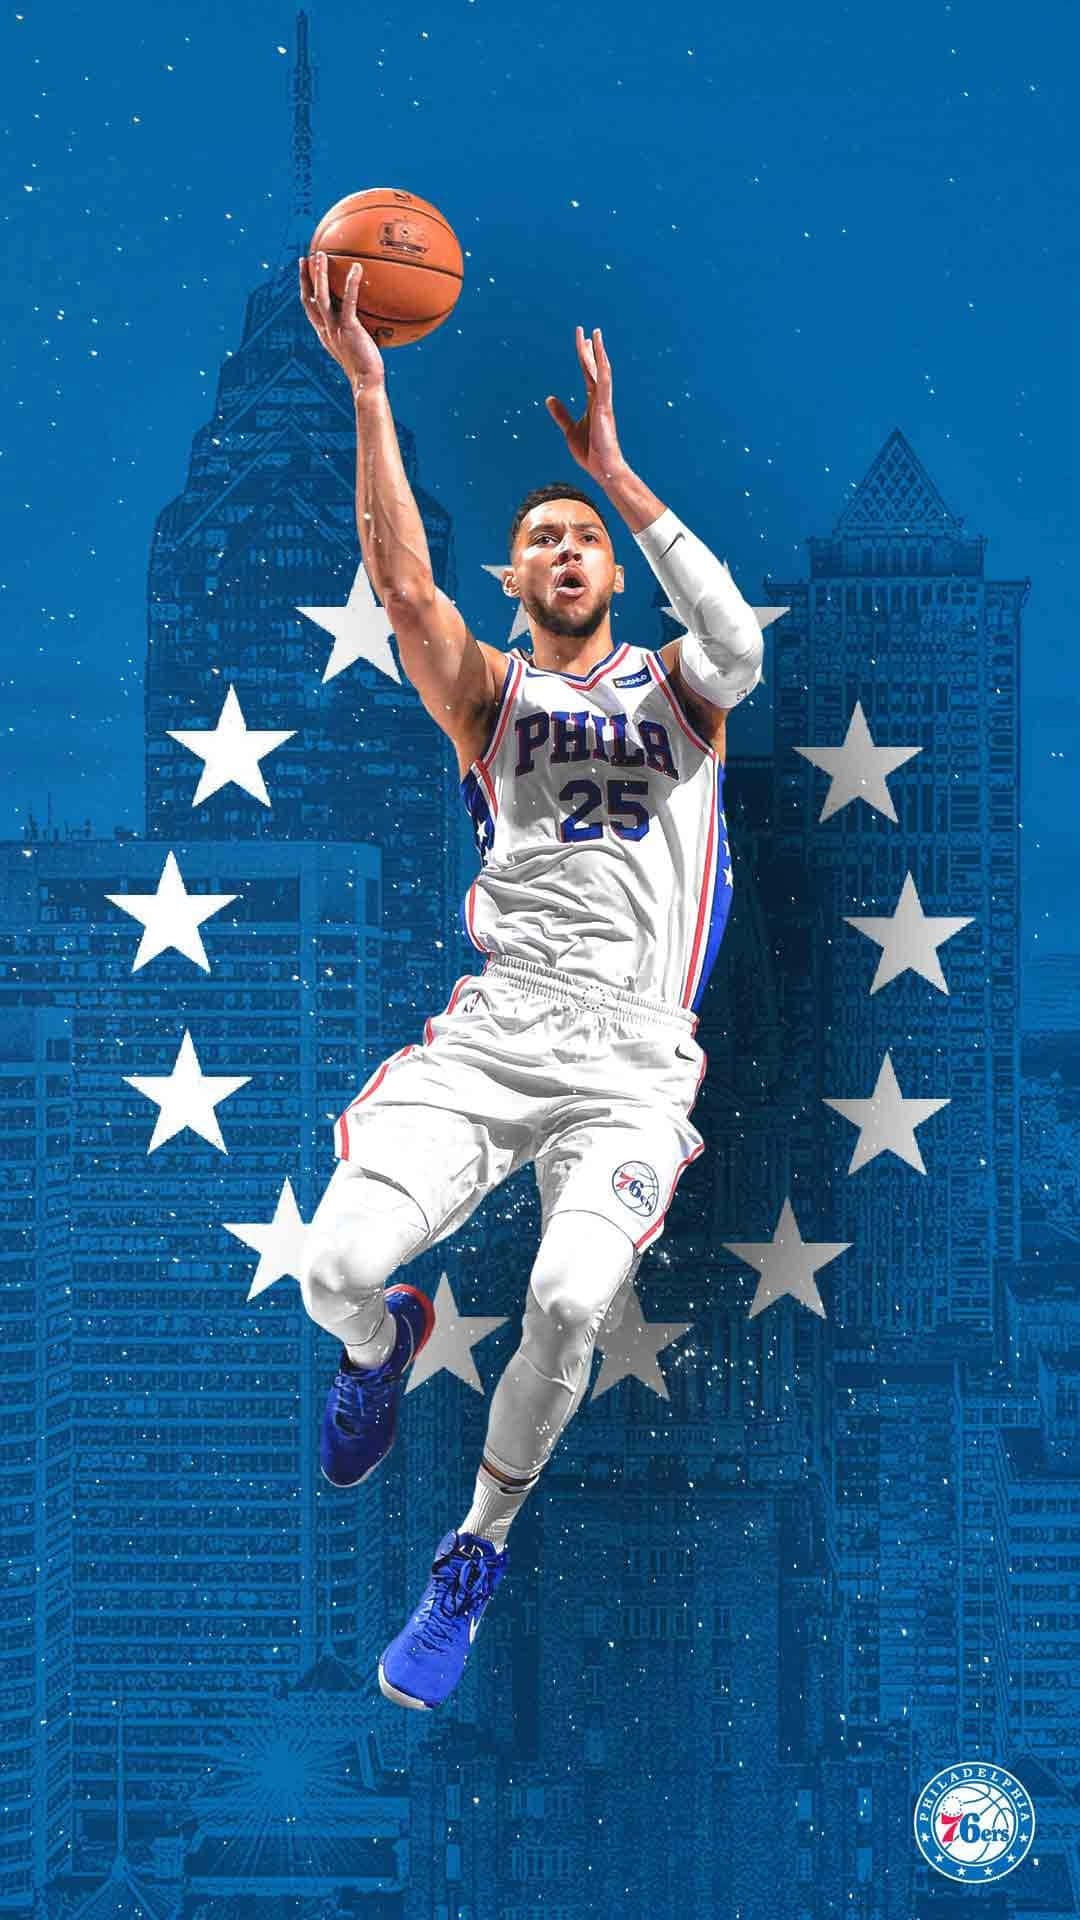 Enjoy 76ers games with friends on your iPhone Wallpaper